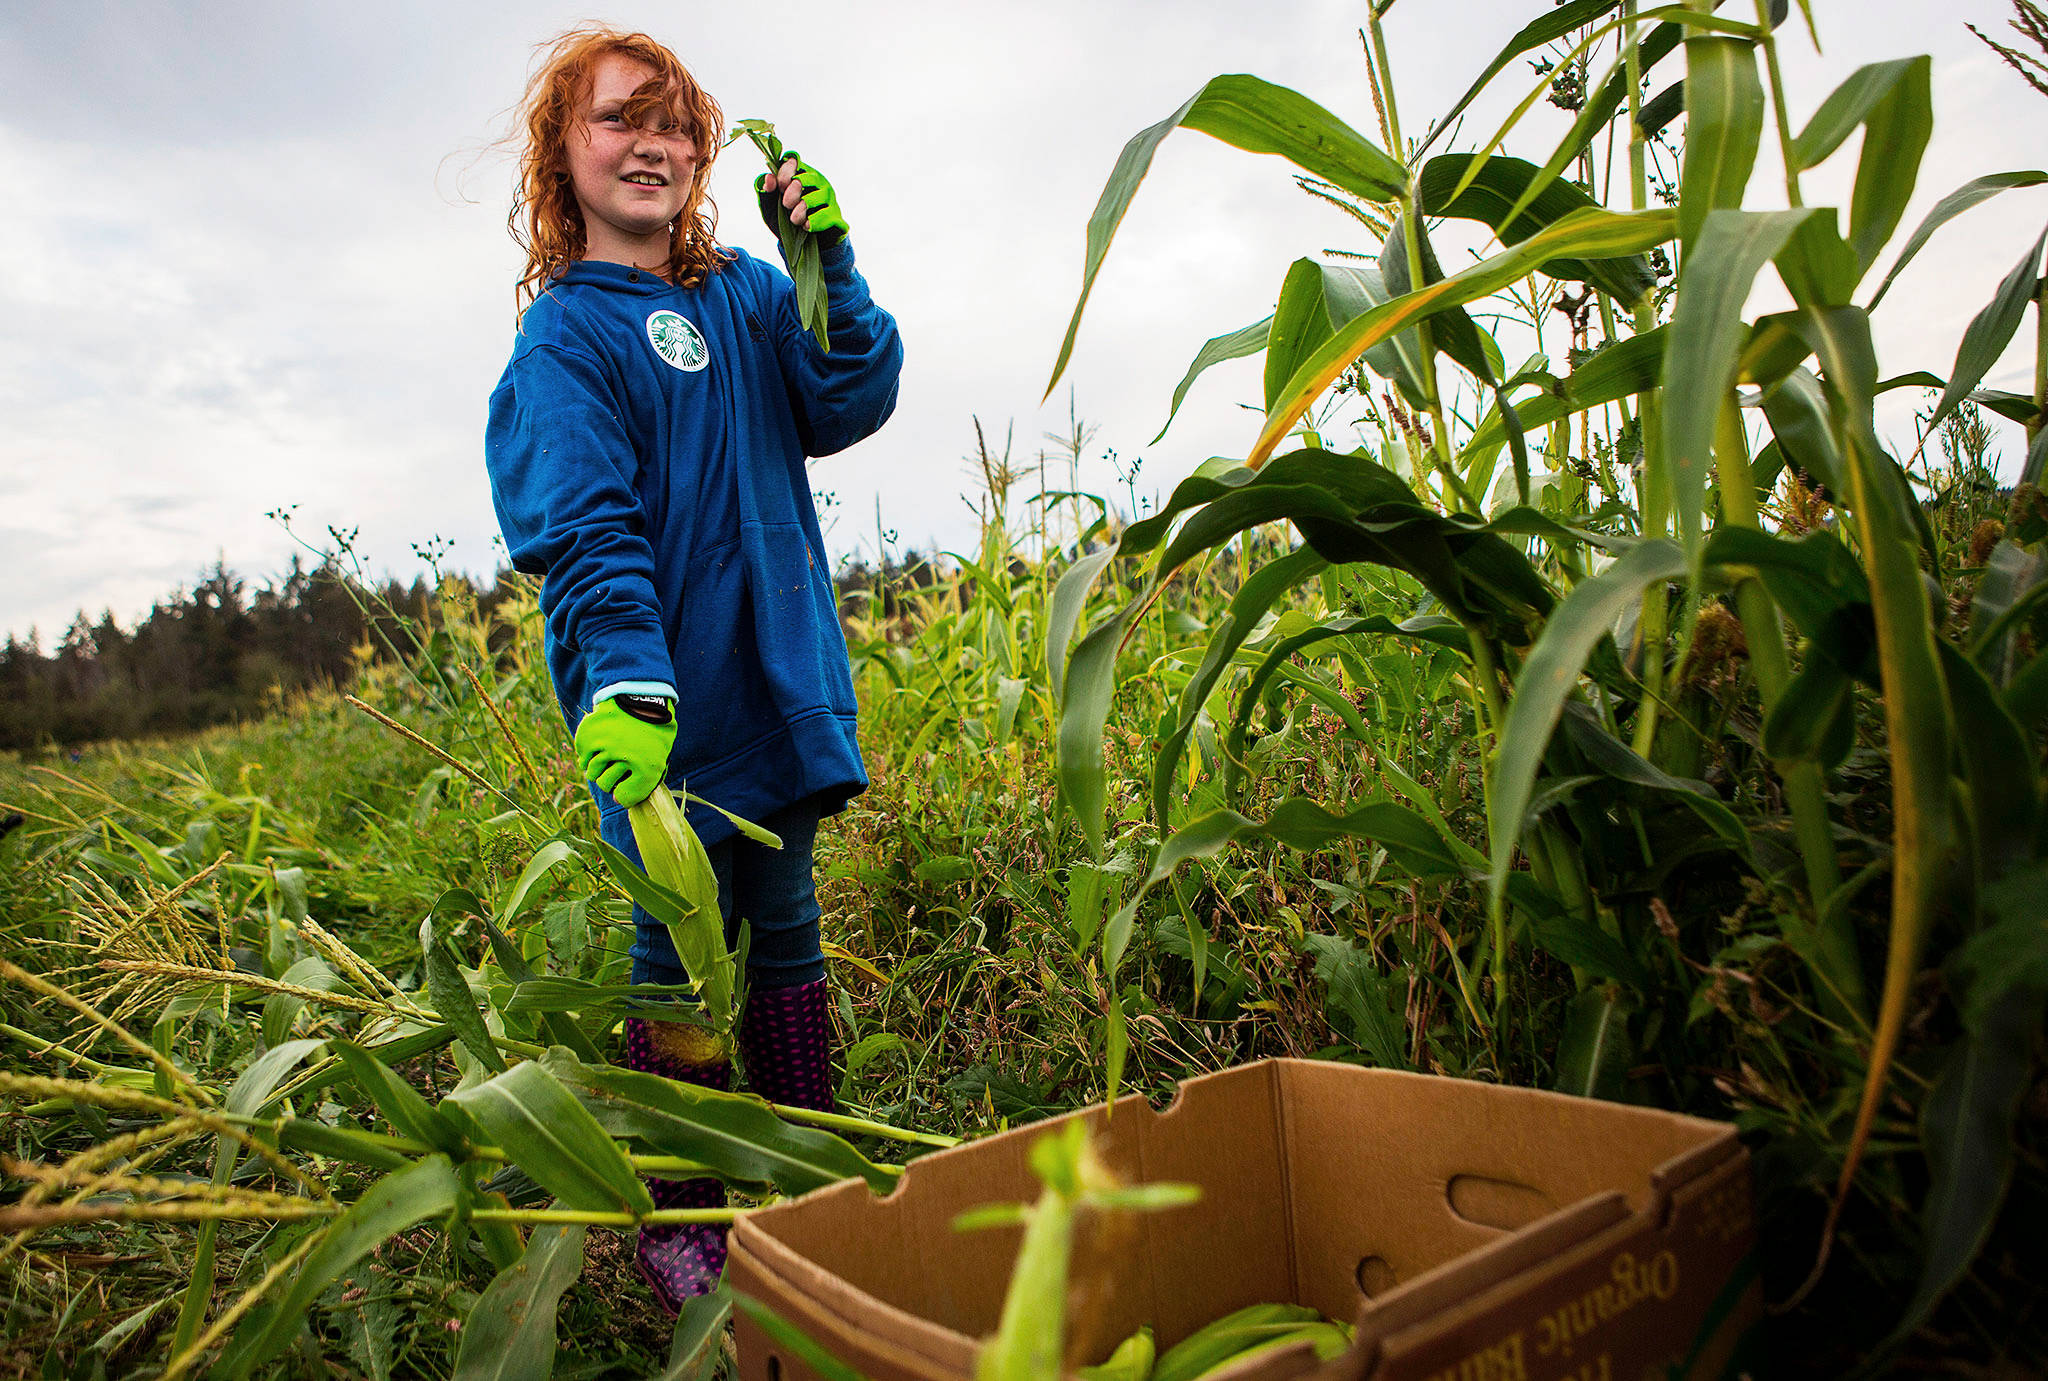 Marley Culp, 8, gathers corn during the annual Community Harvest and Hustle on Ebey Island on Sept. 7 in Everett. (Olivia Vanni / The Herald)